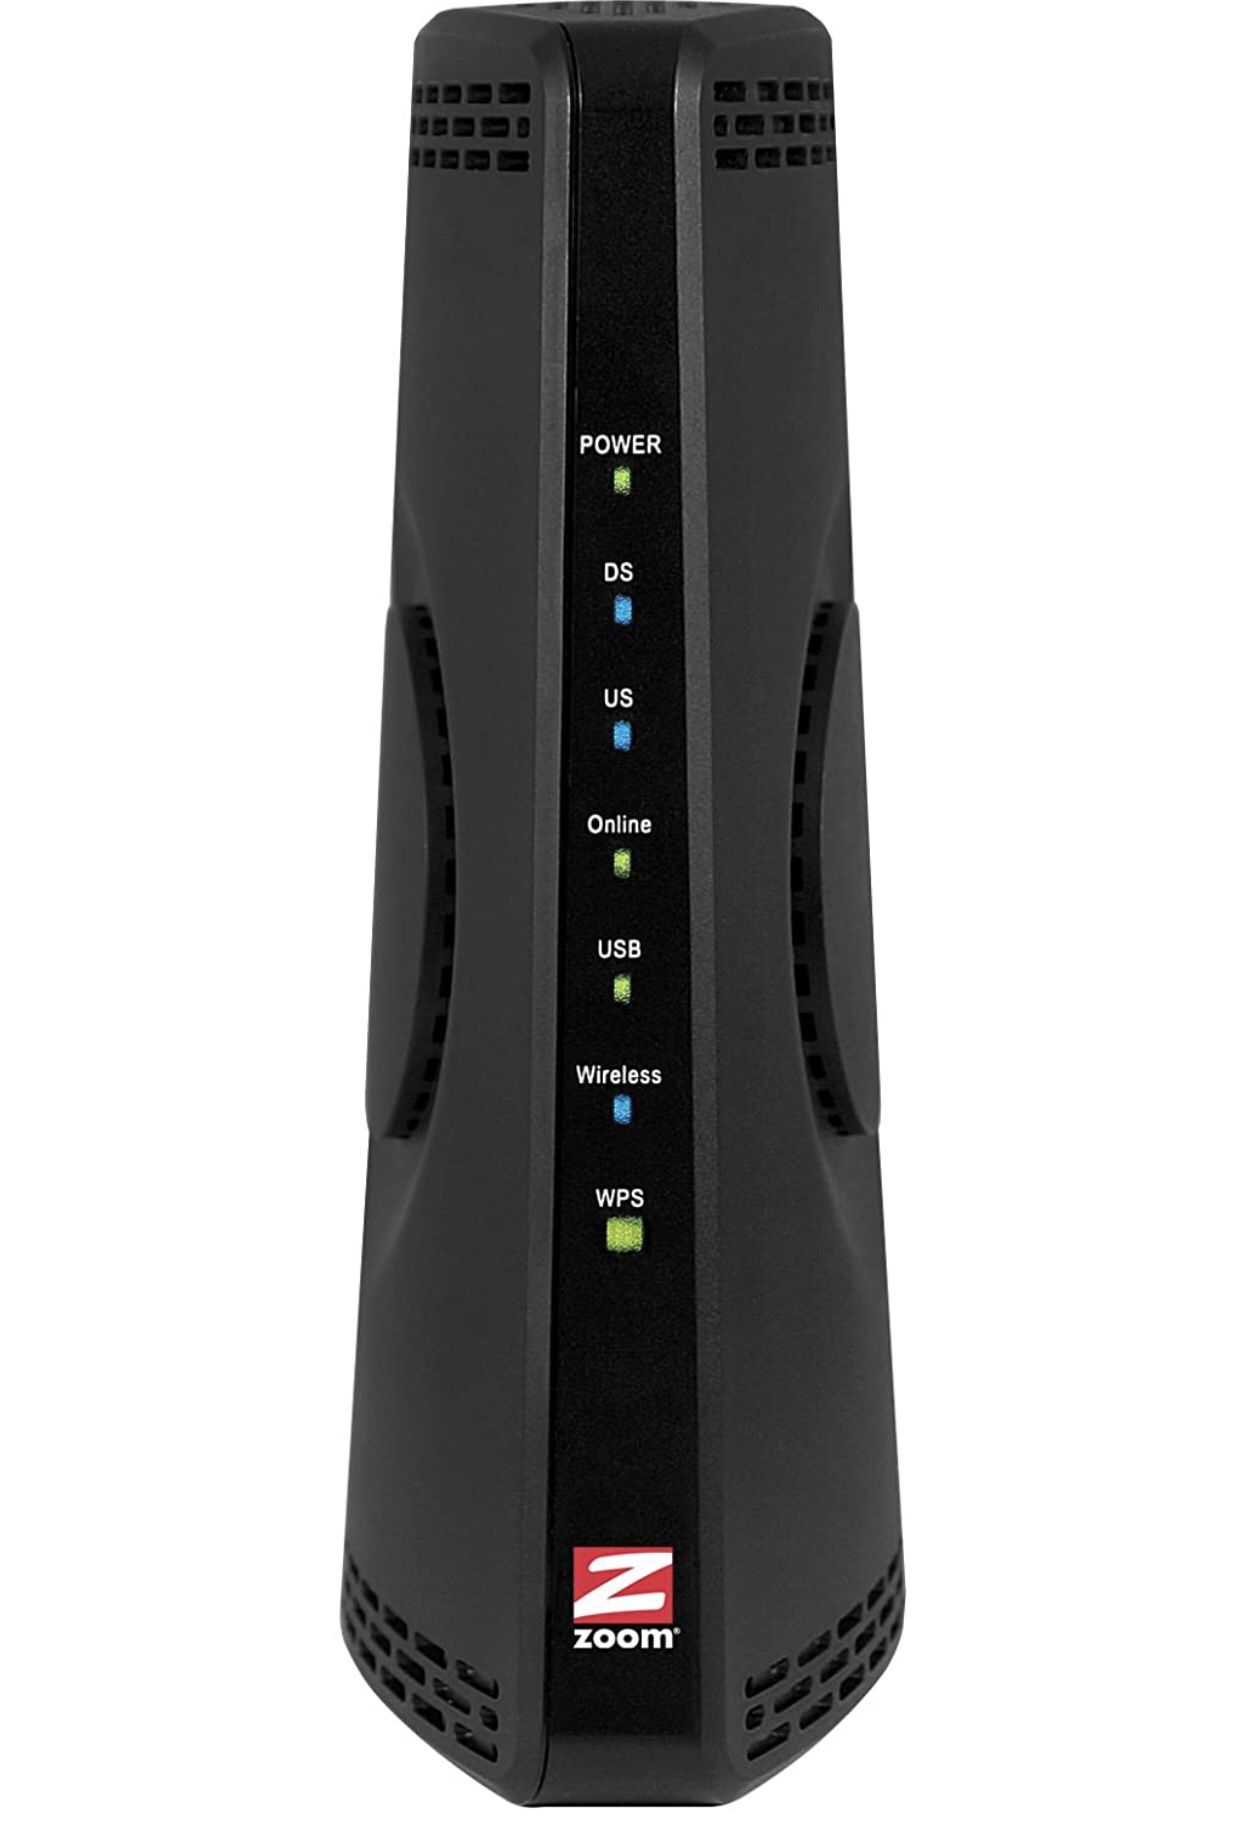 Zoom Modem / Router